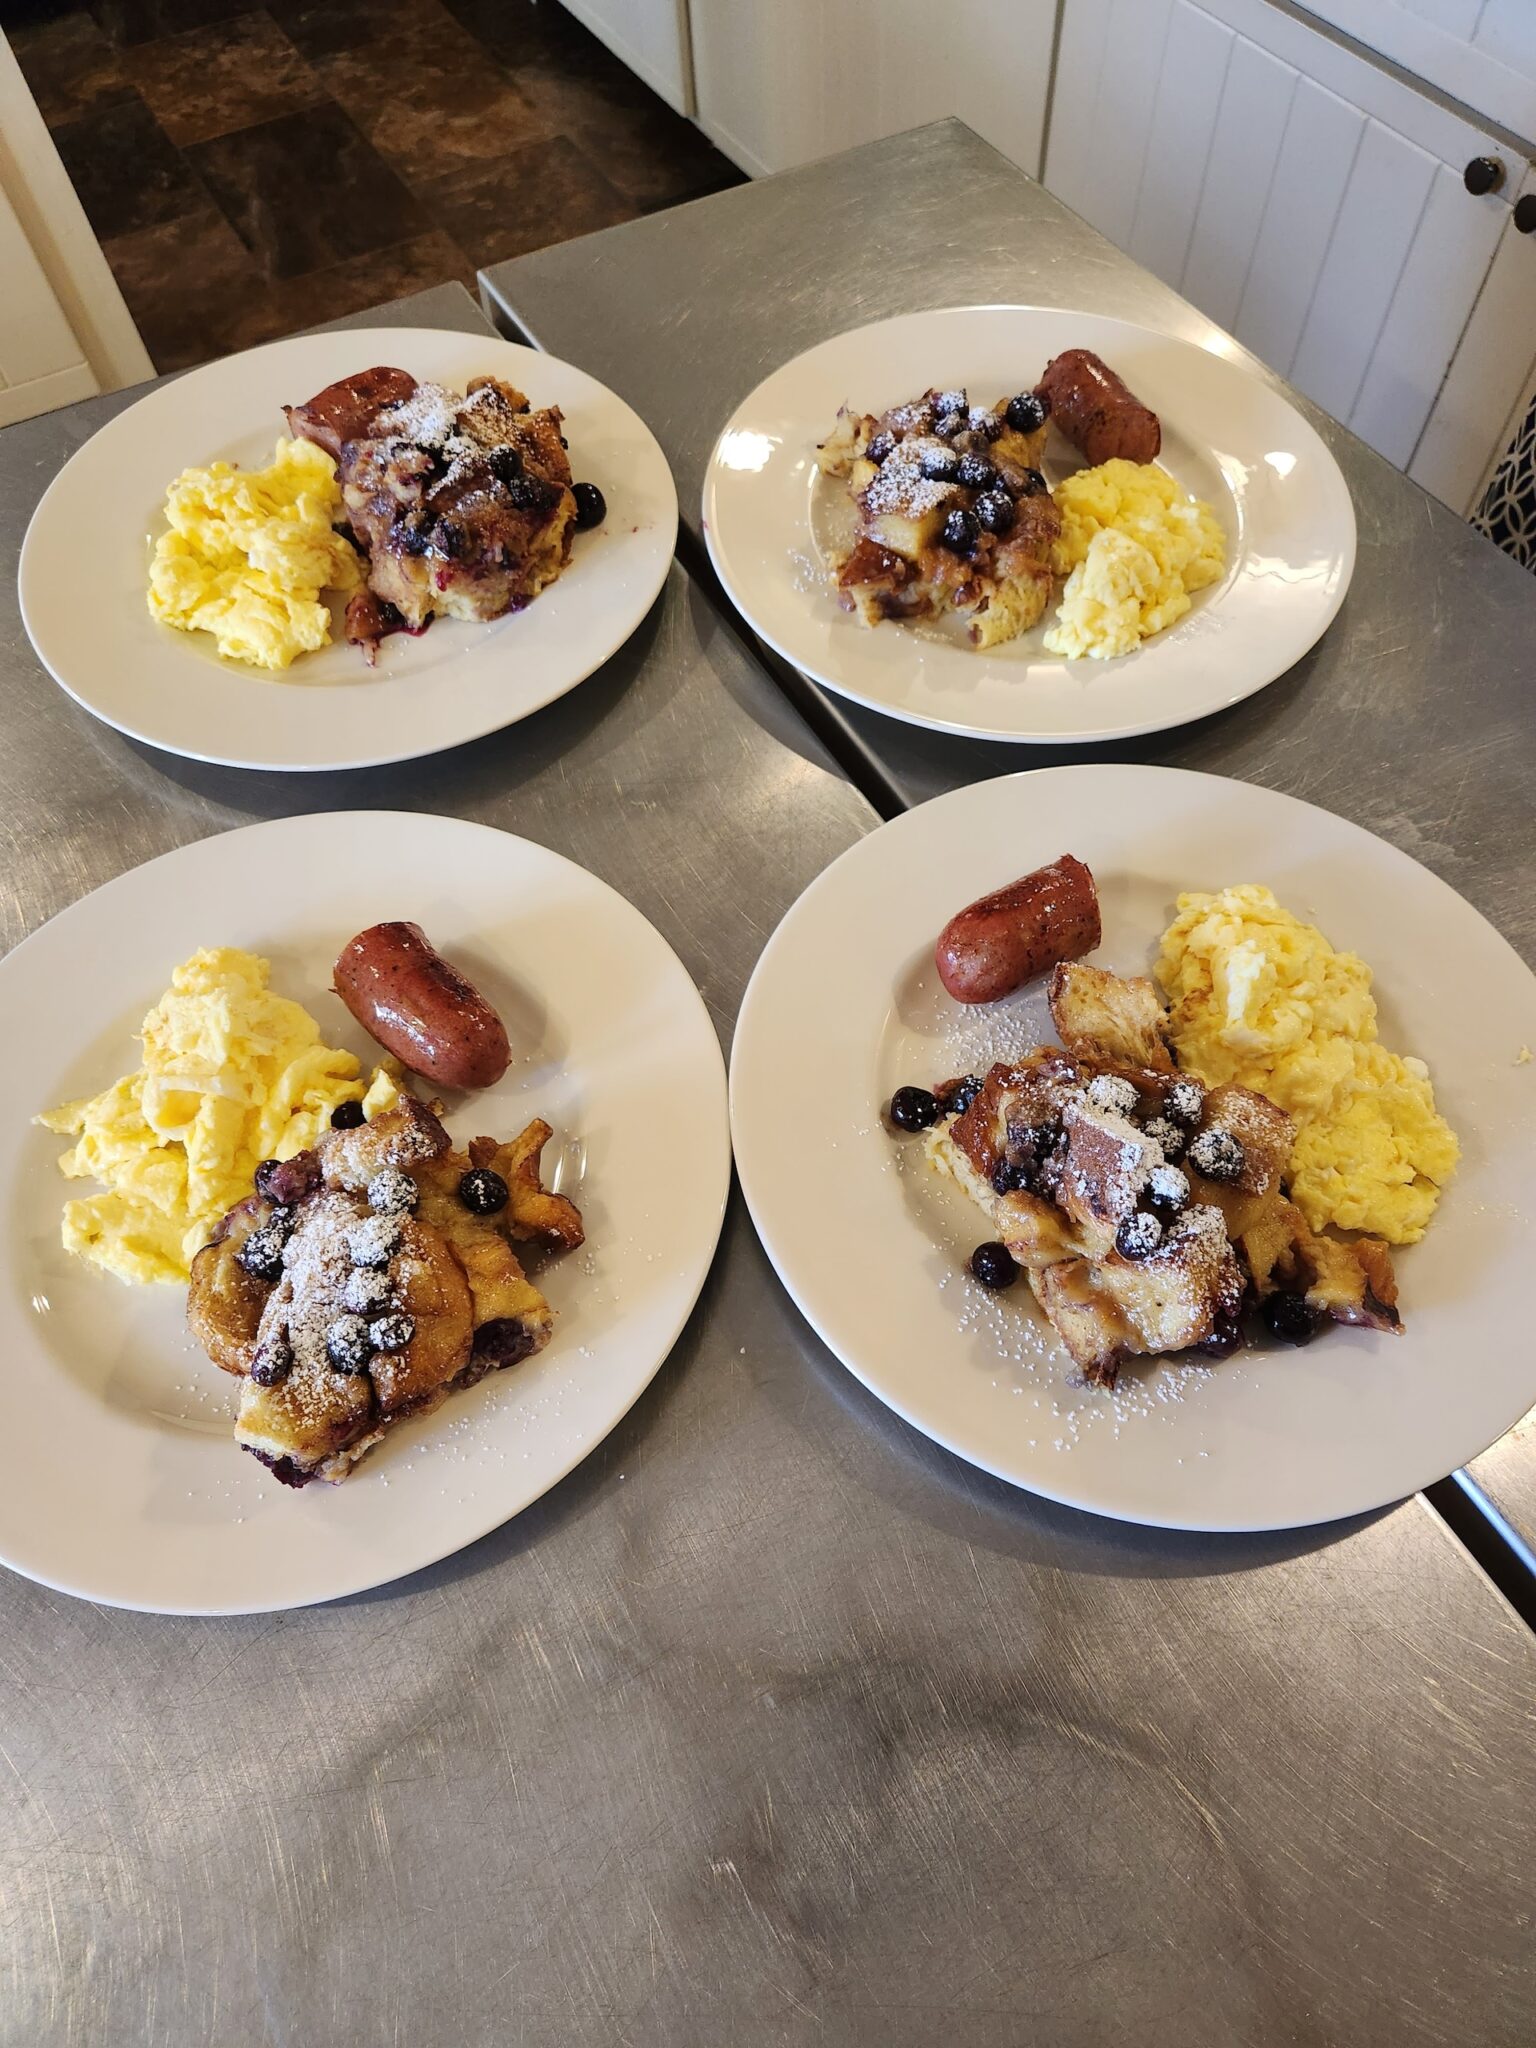 Blueberry french toast crumble, scrambled eggs, and sausage